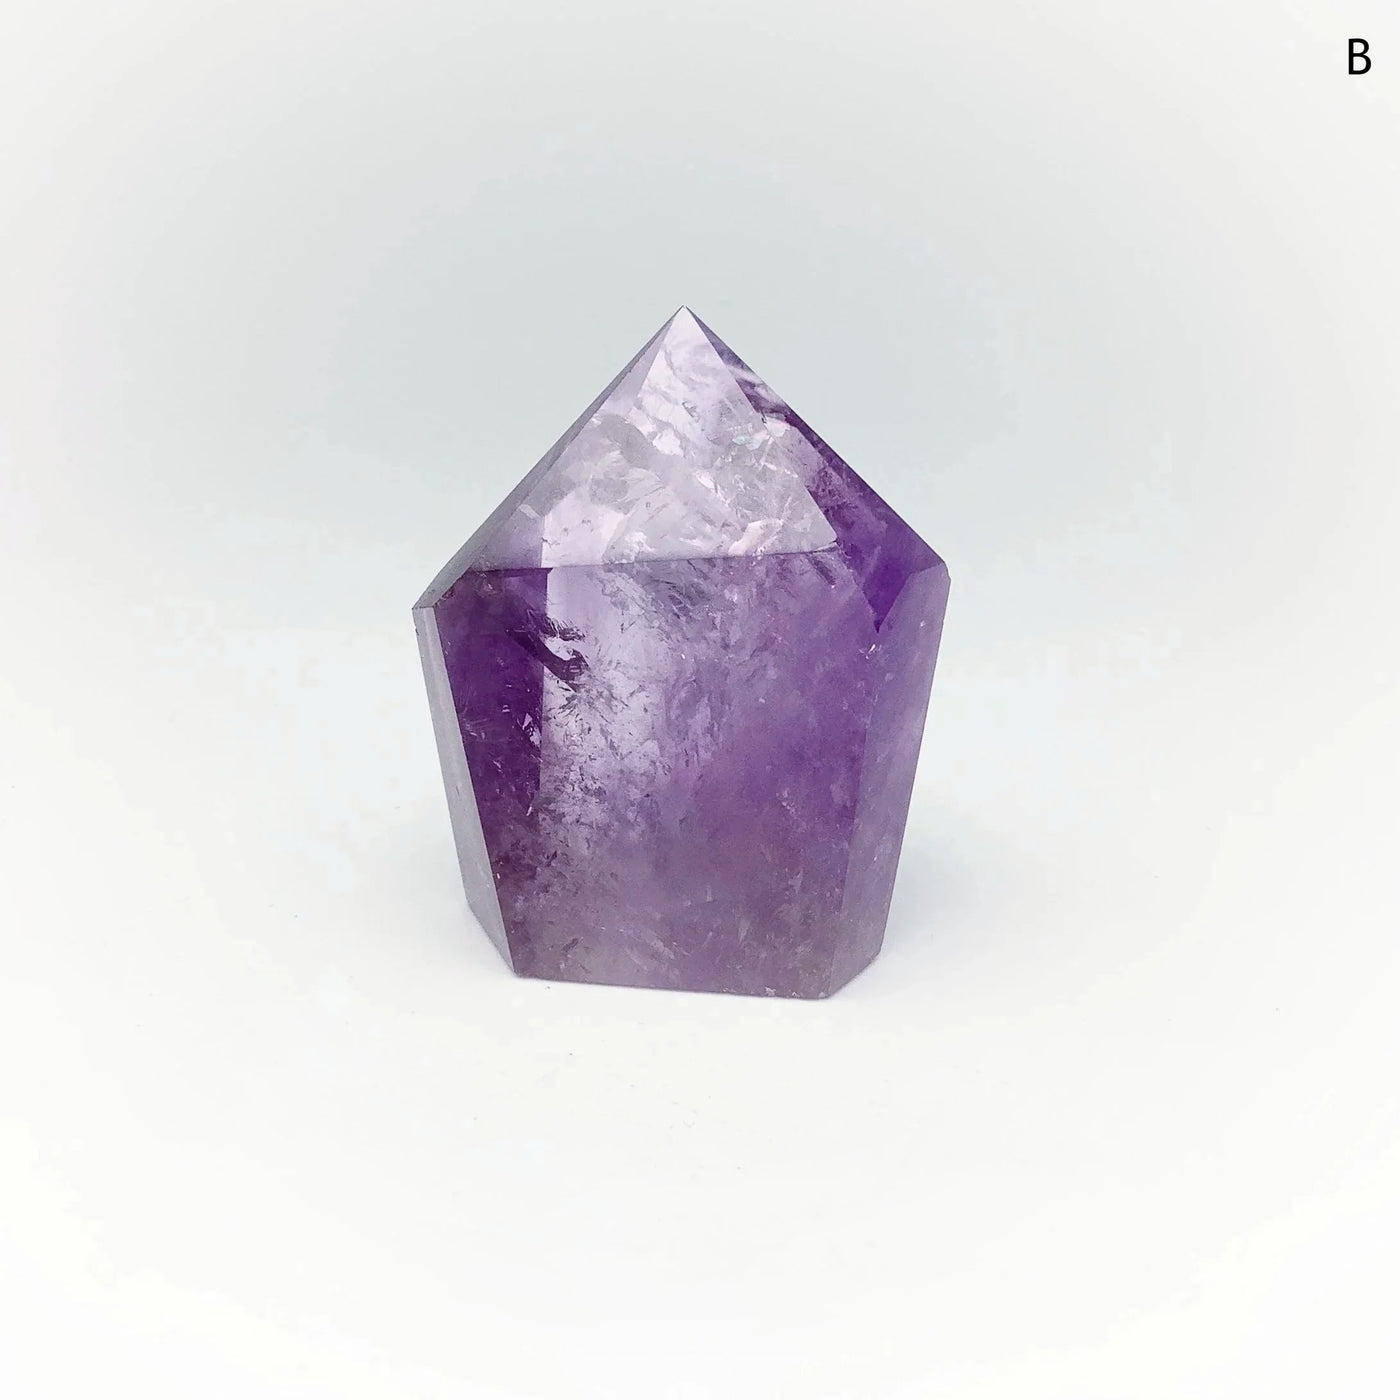 Small Amethyst Point at $59 Each